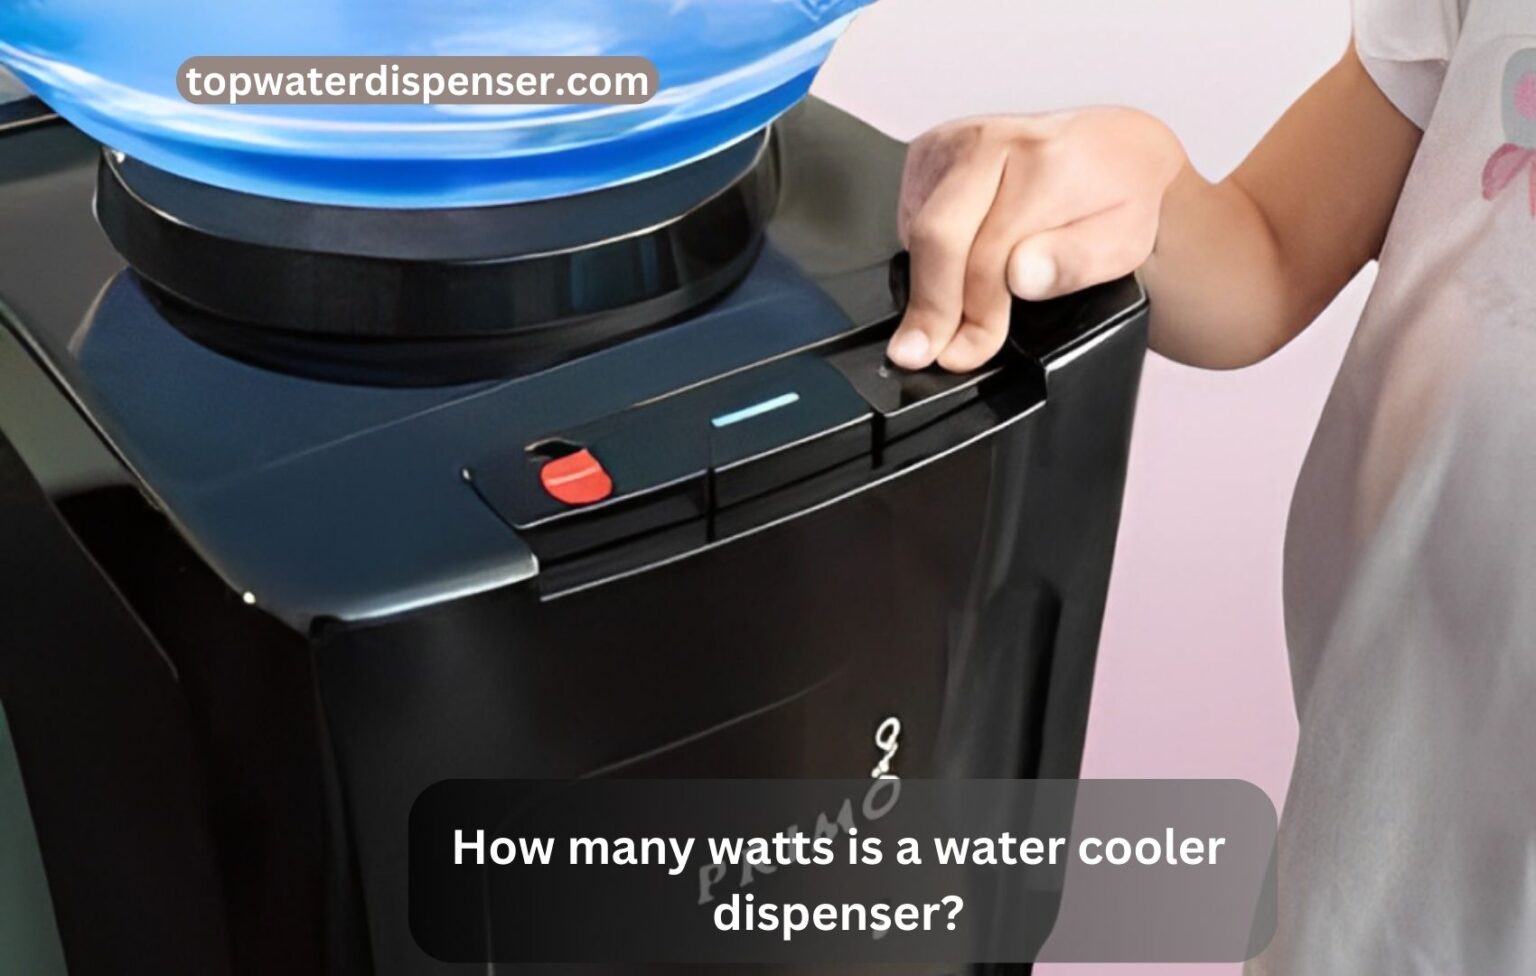 How many watts is a water cooler dispenser?